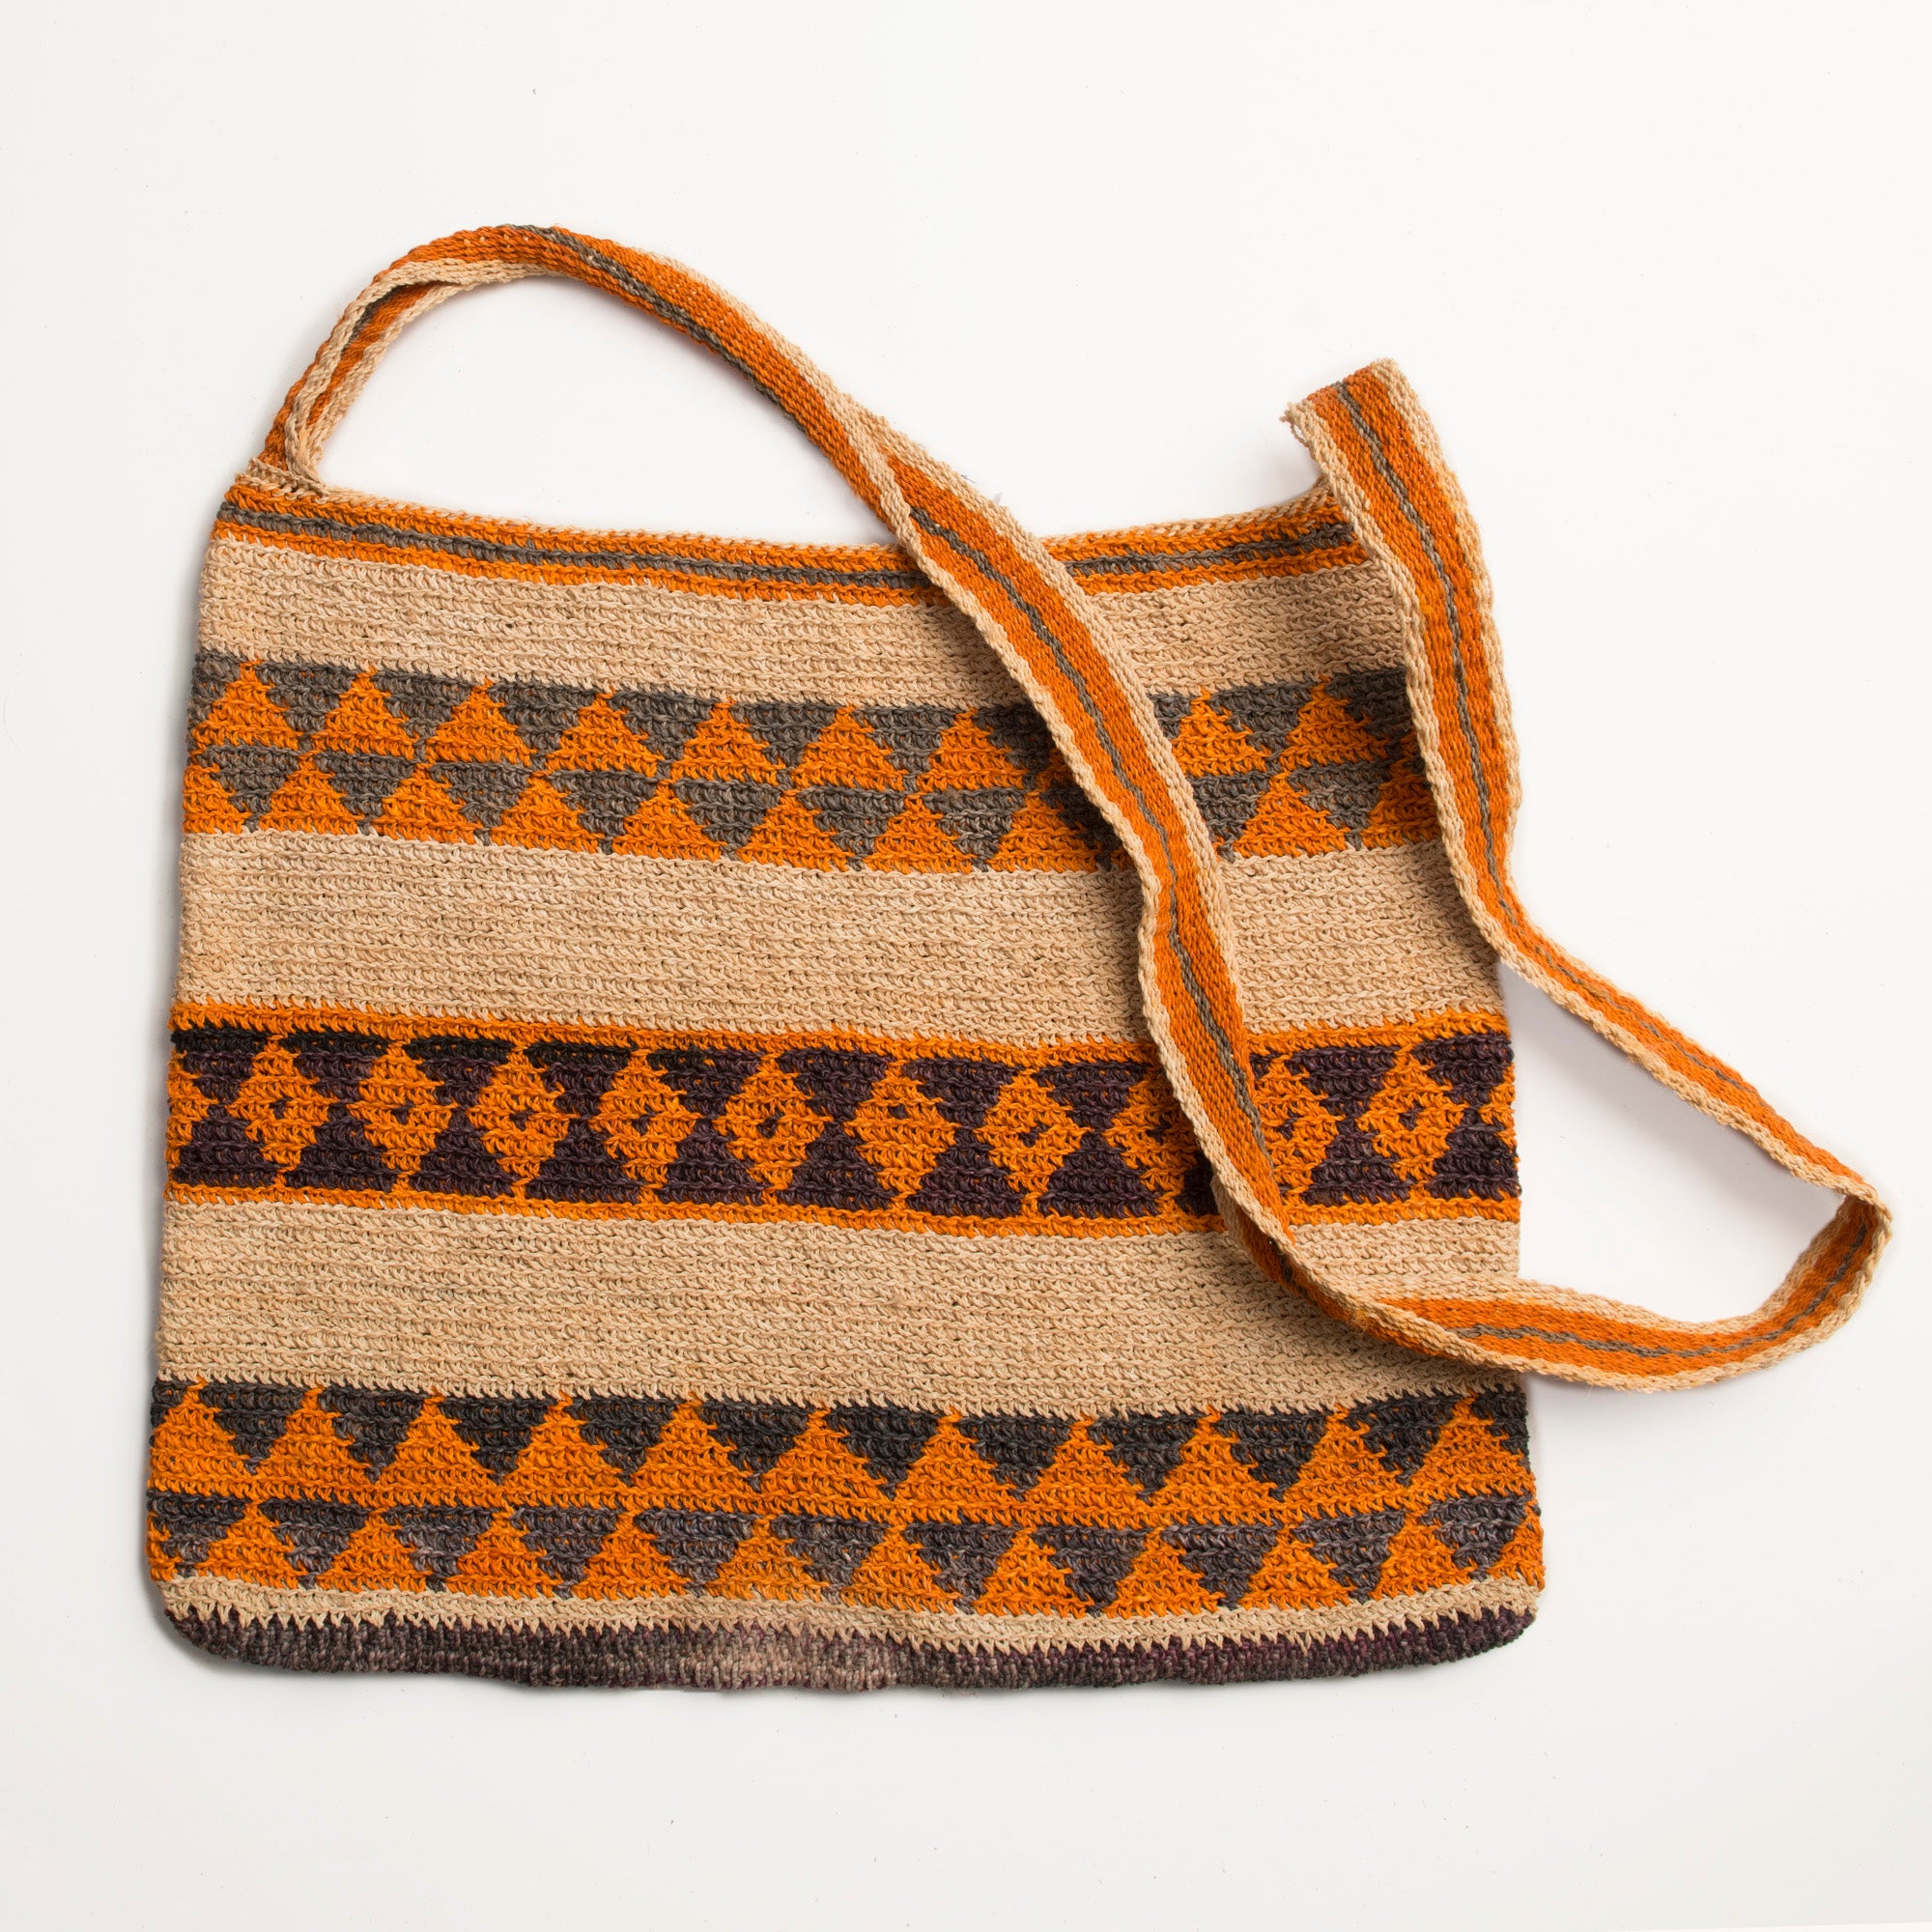 Intricately Designed, Crocheted, Shoulder Strap Bags, made in Peruvian Amazon